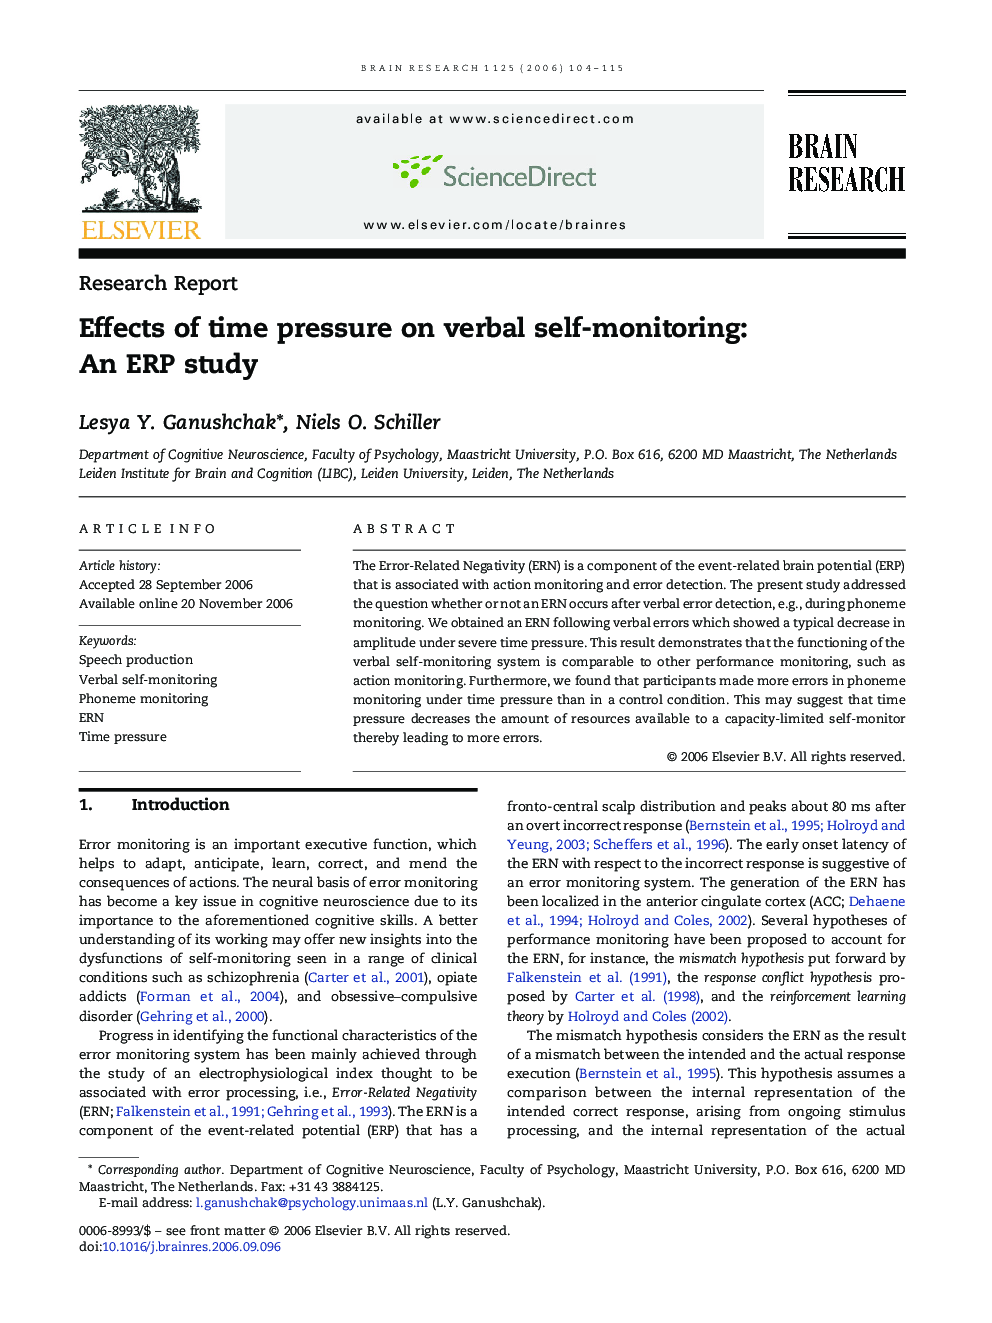 Effects of time pressure on verbal self-monitoring: An ERP study